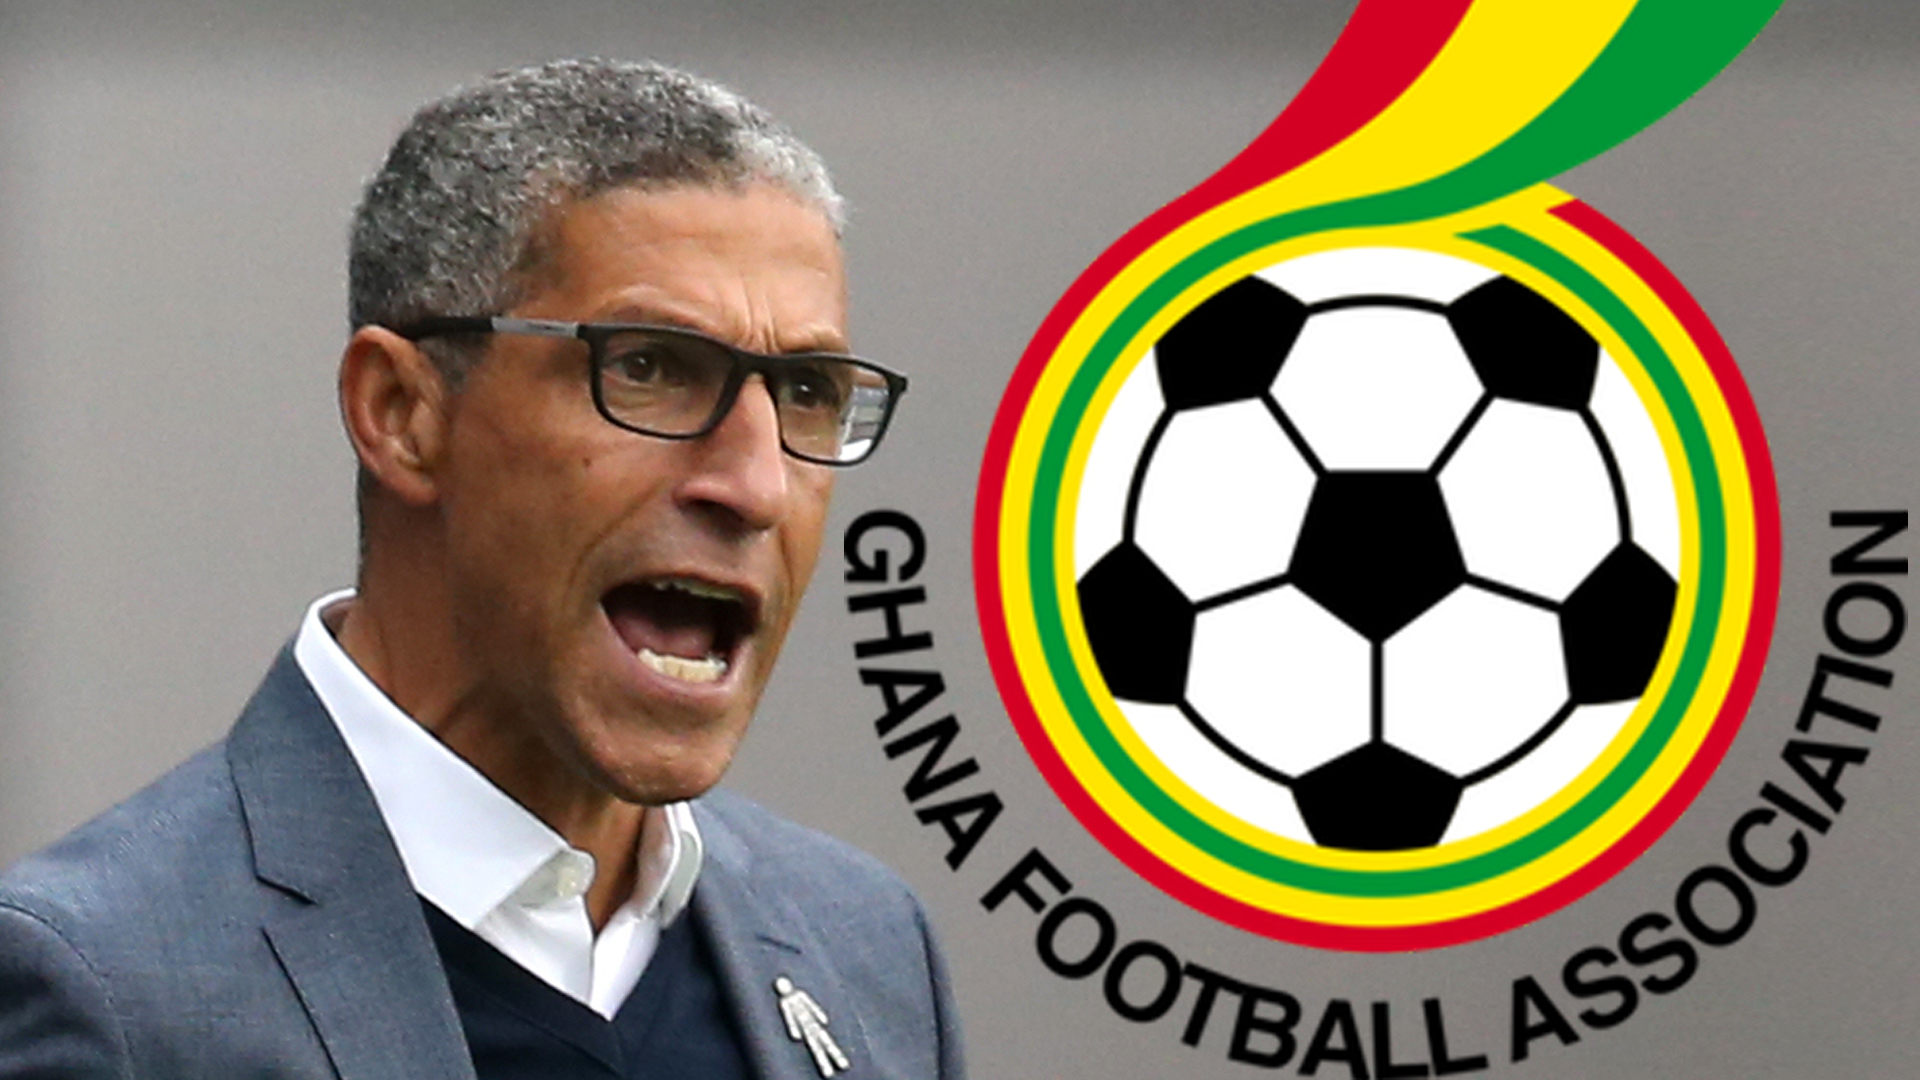 Chris Hughton to take charge of first game as Ghana coach against Angola